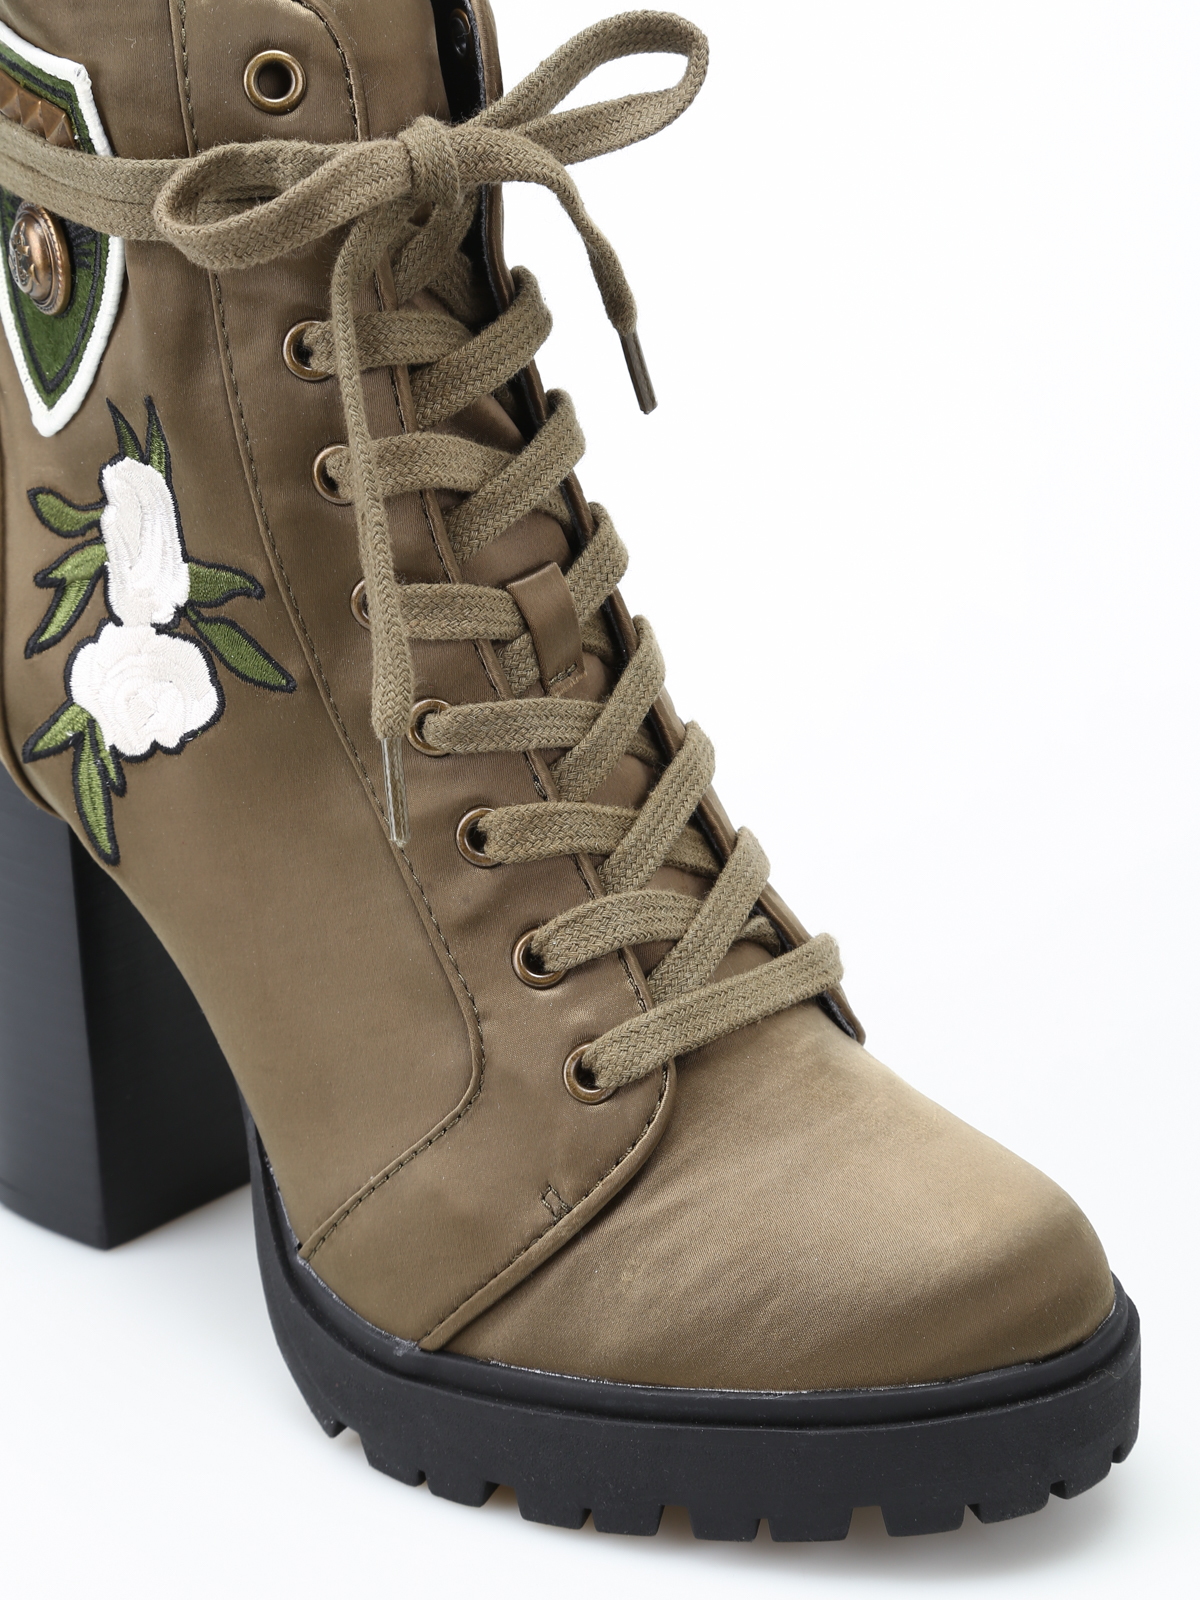 steve madden embroidered boots